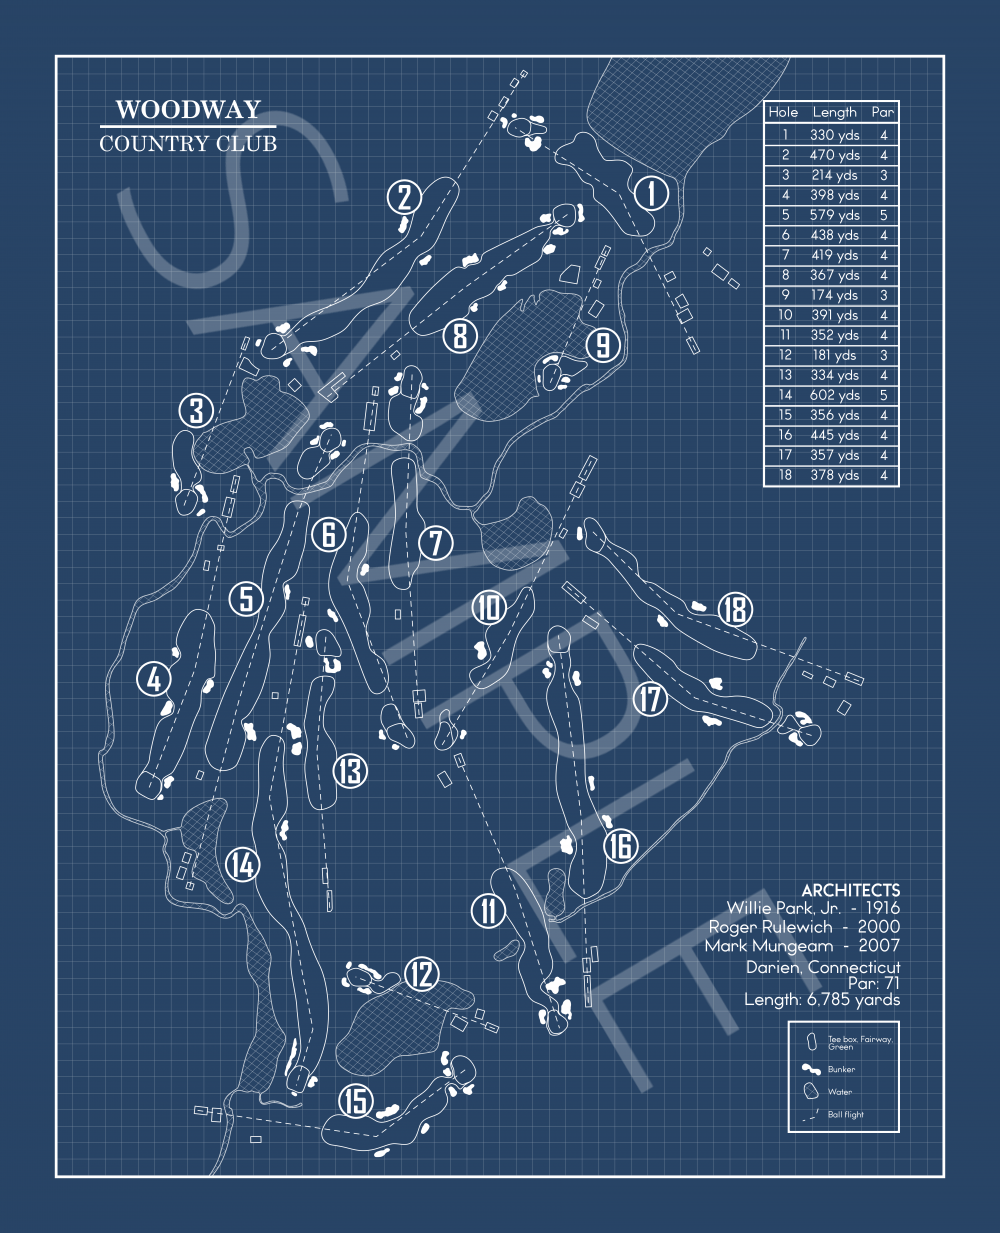 Woodway Country Club Blueprint (Print)